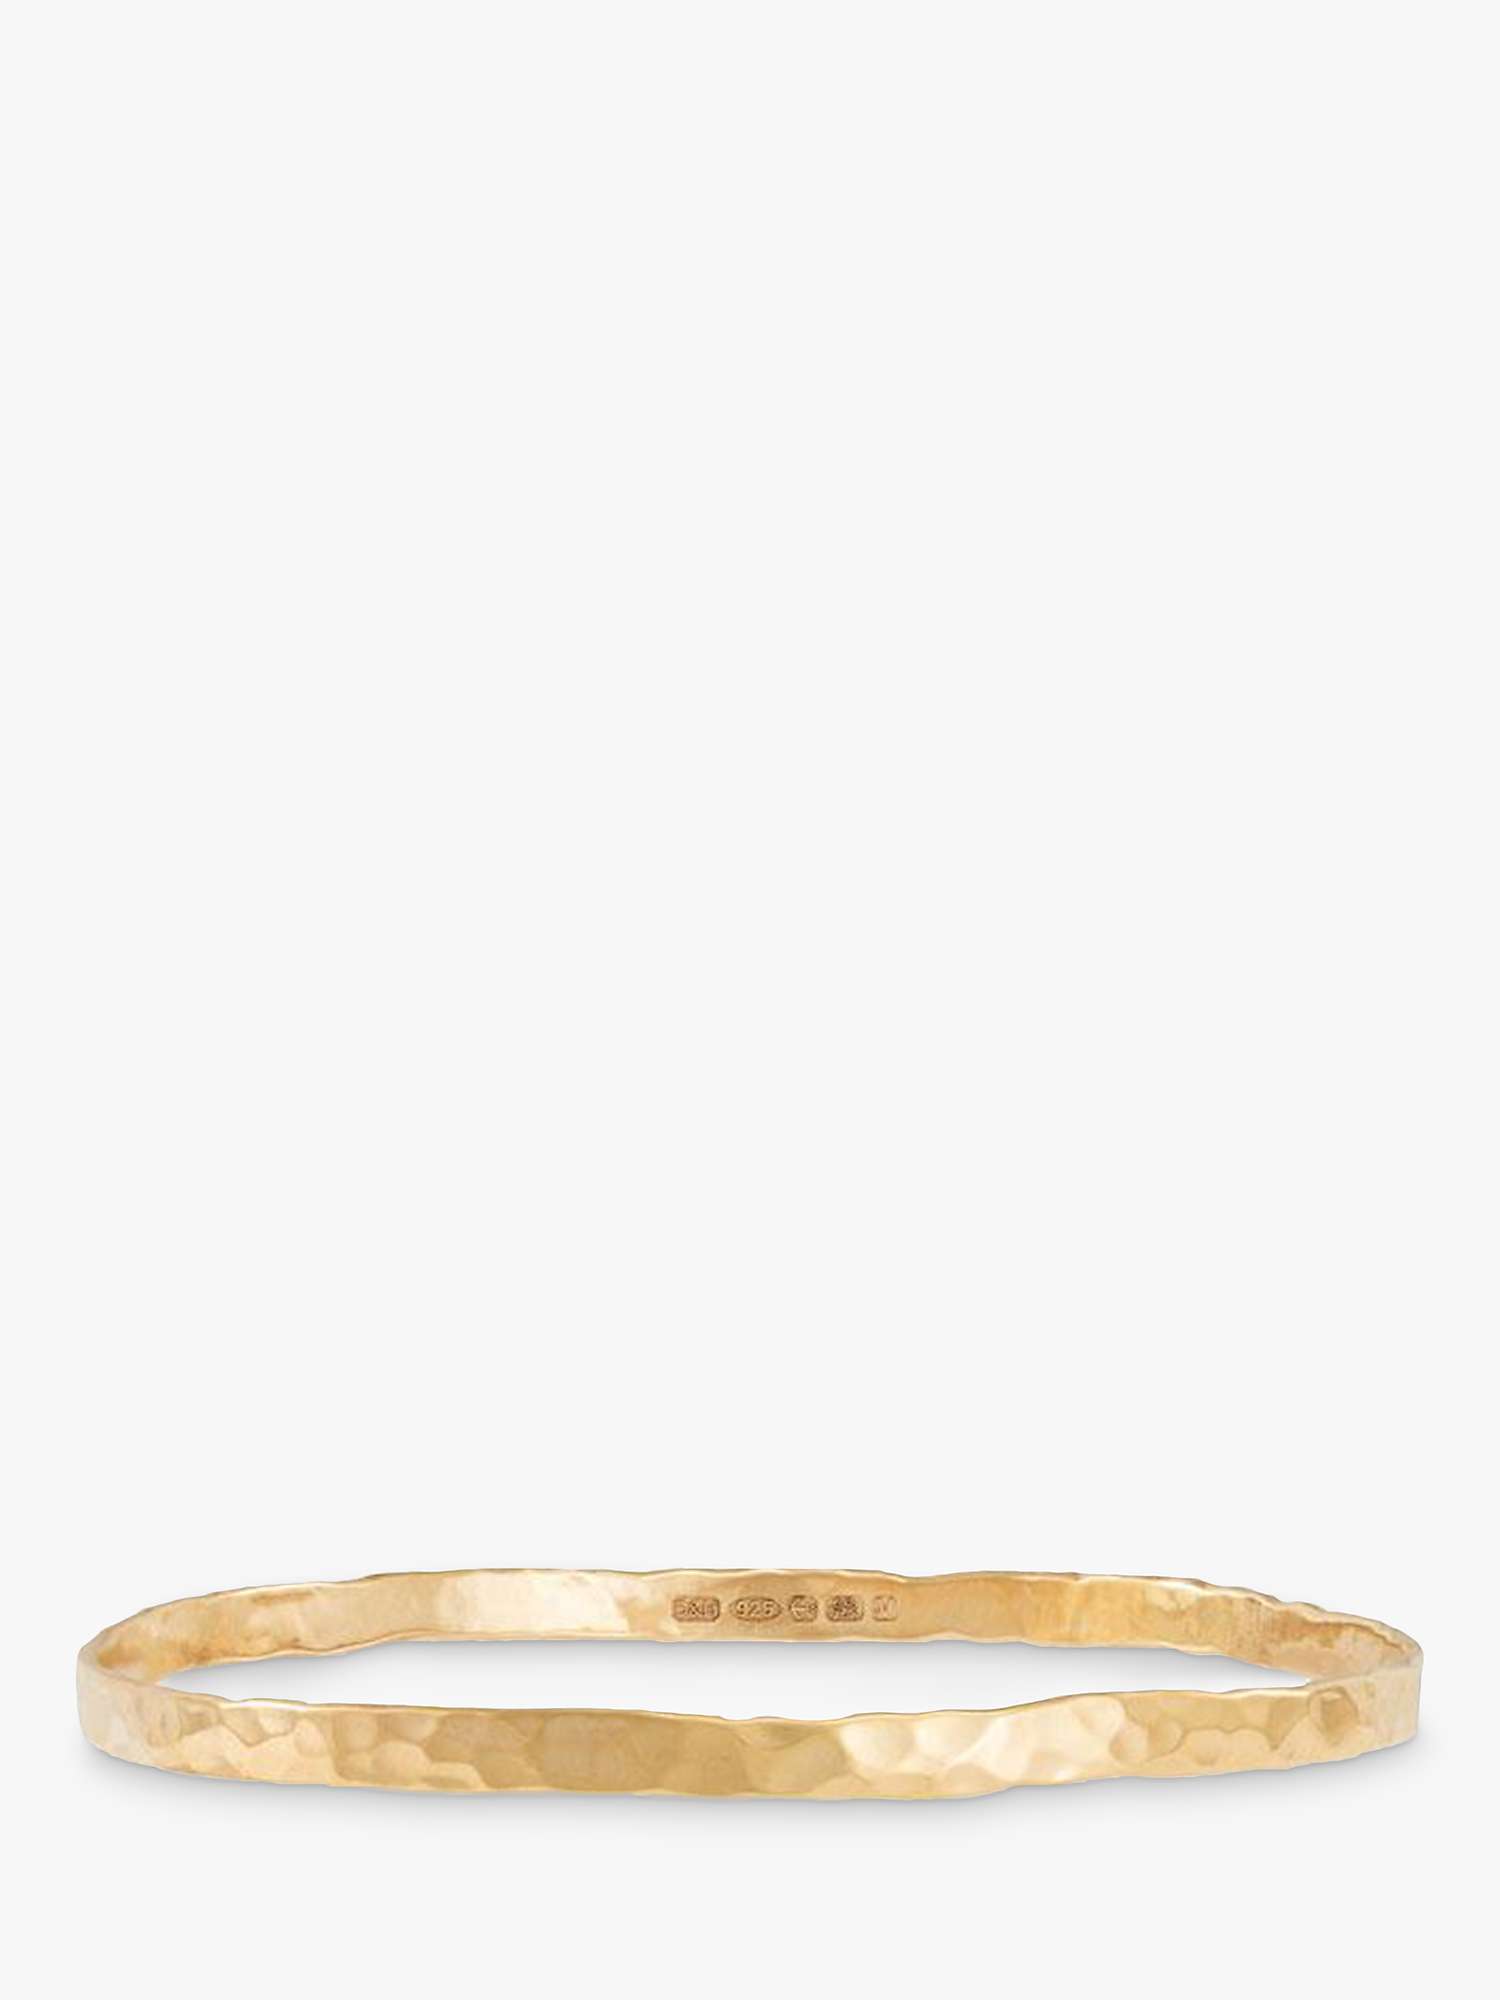 Buy Dower & Hall 18ct Gold Plated Sterling Silver Hammered Bangle, Gold Online at johnlewis.com